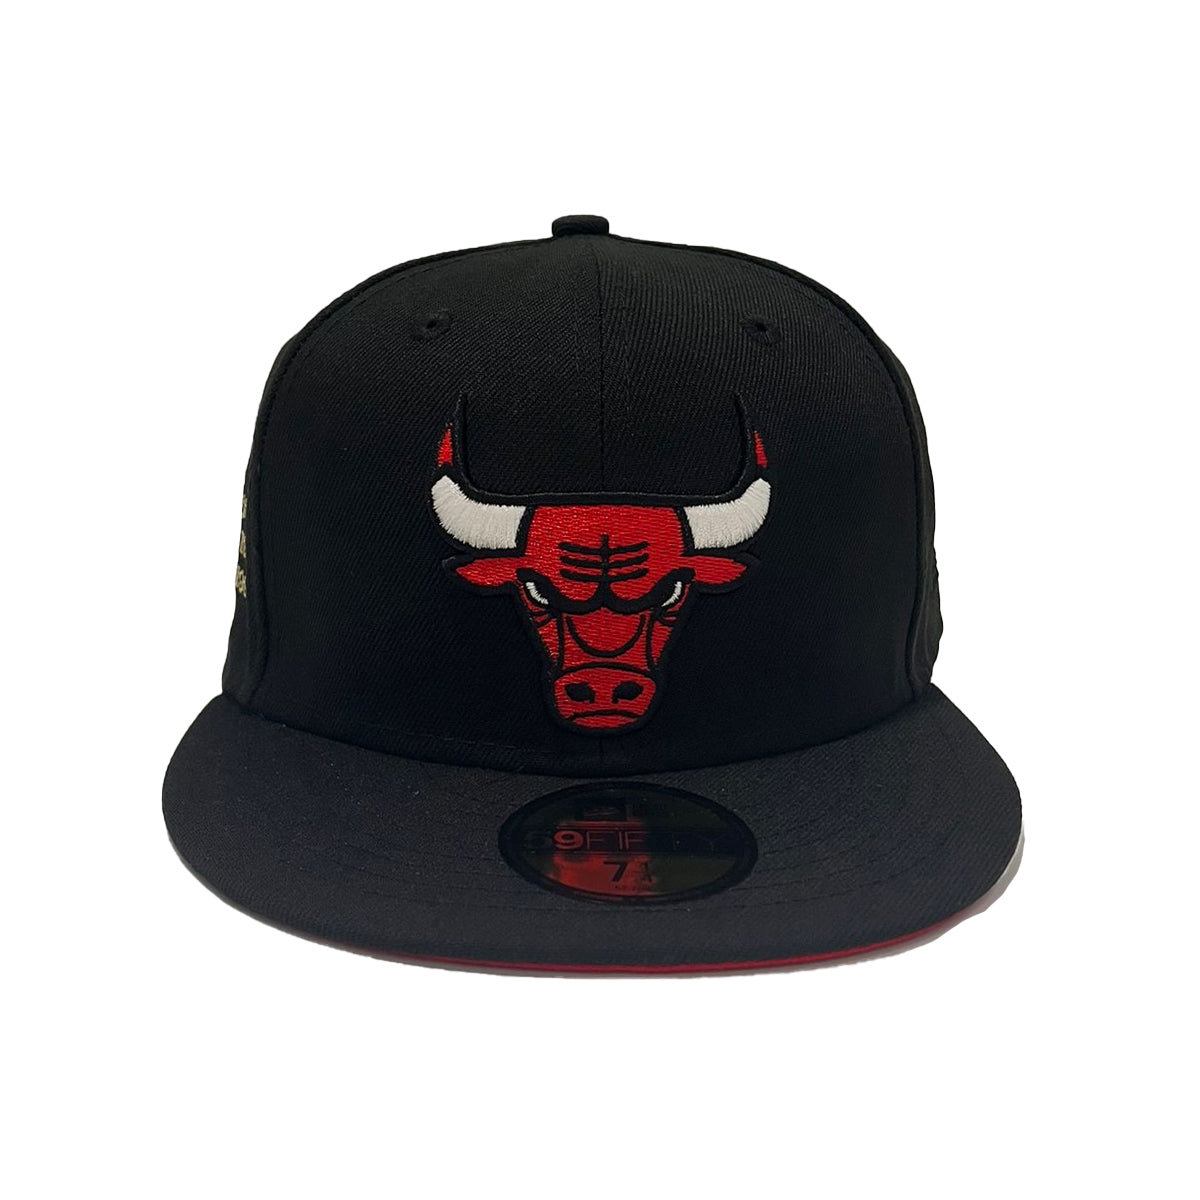 CHICAGO BULLS NBA SUGAR BACON FITTED HAT 6HSFSH21250-CBUBROW